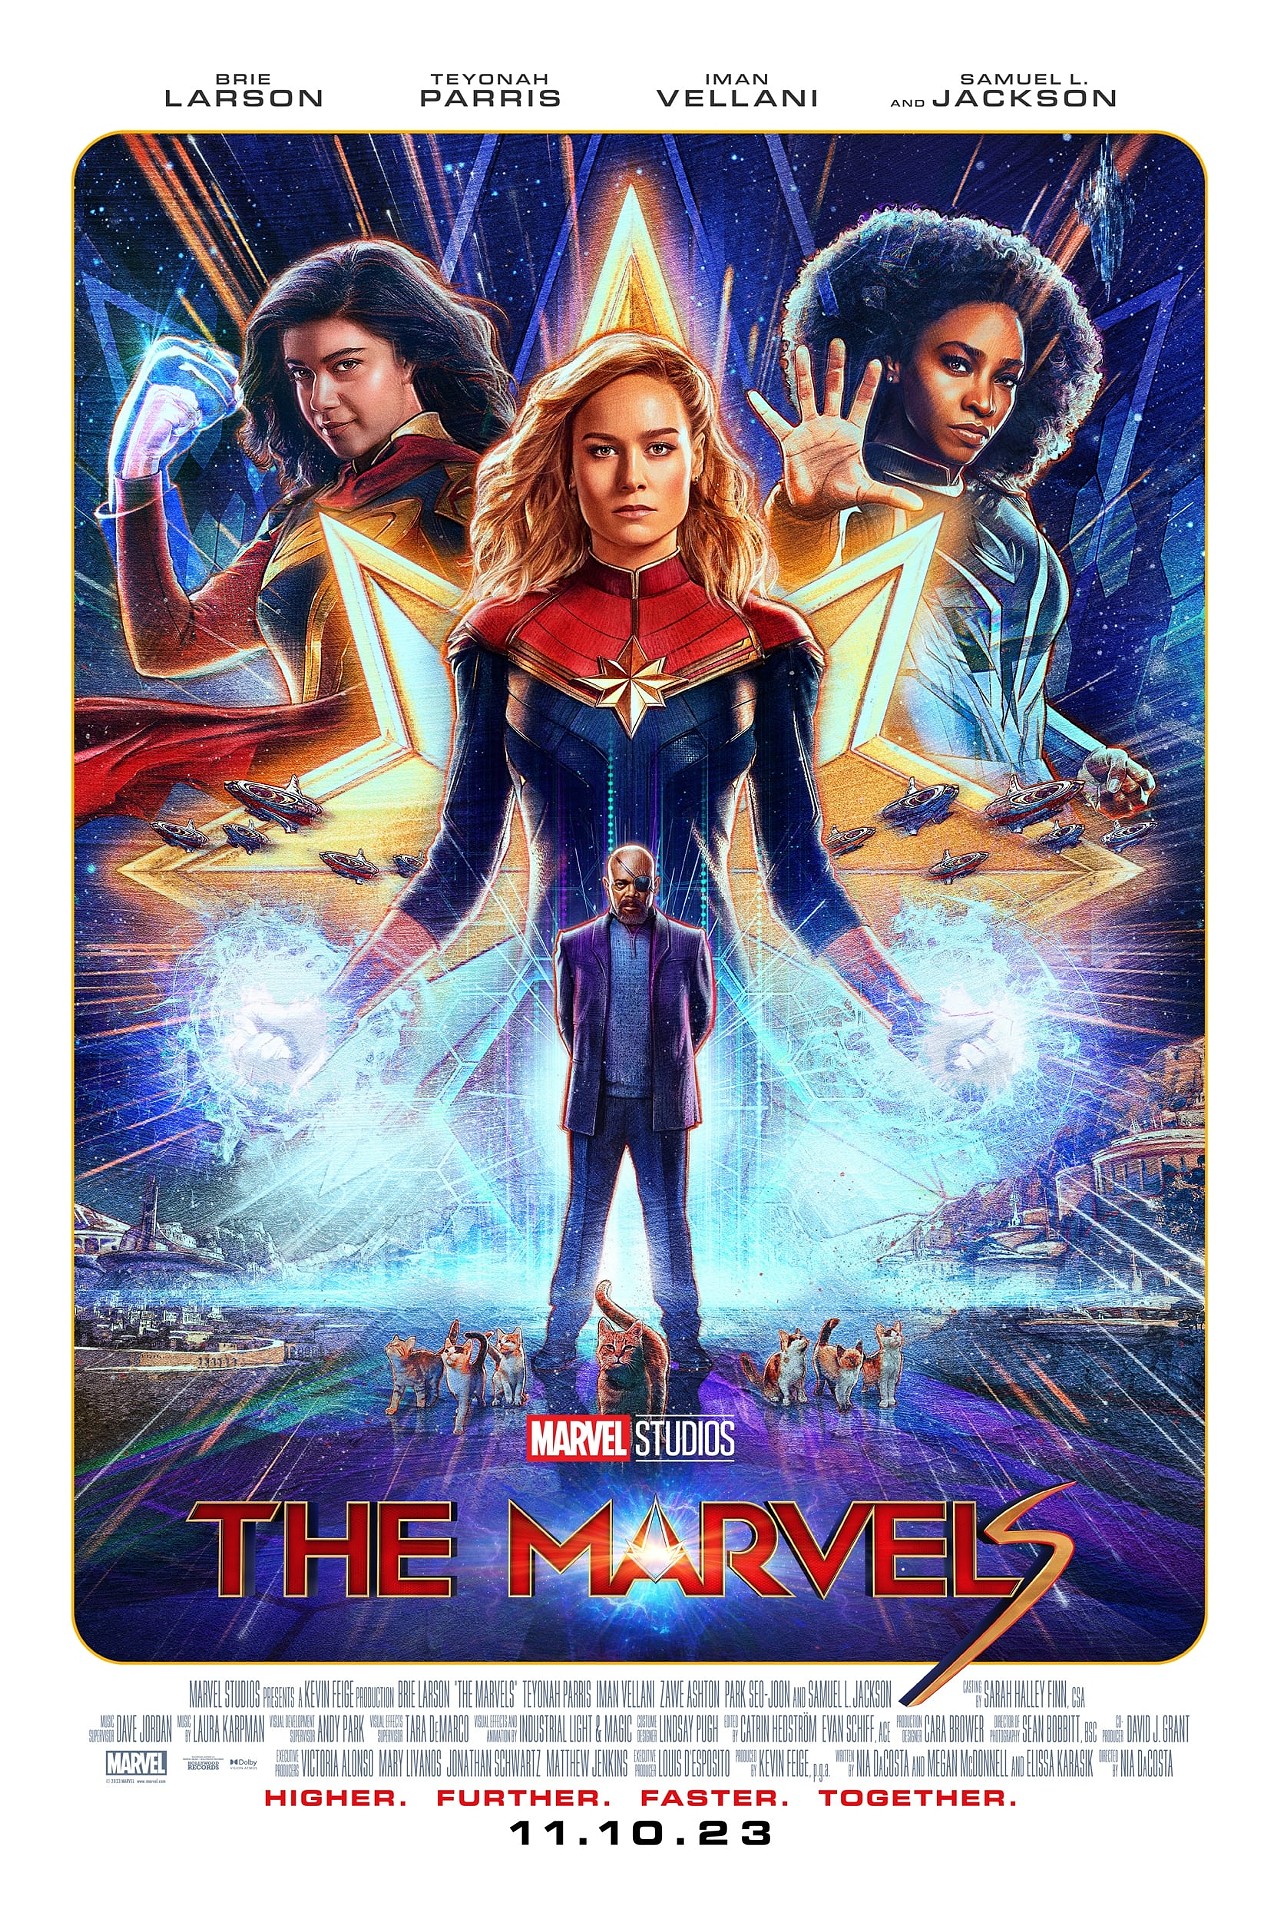 The Marvels: 'The Marvels': Early Test Screenings Offer Mixed Reviews - The  Economic Times